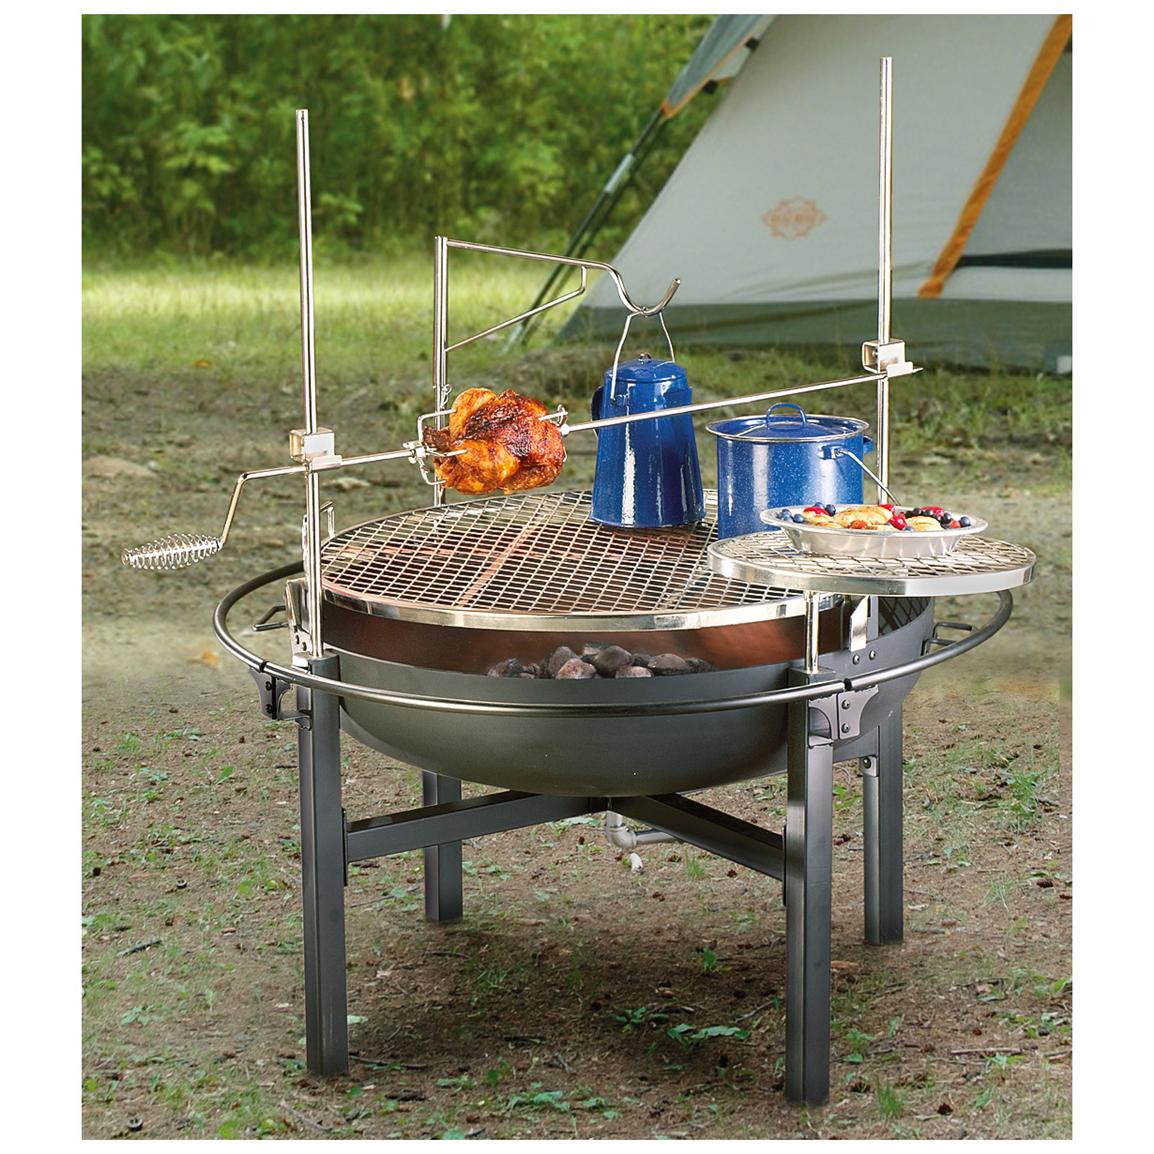 Cowboy Fire Pit Rotisserie / Grill